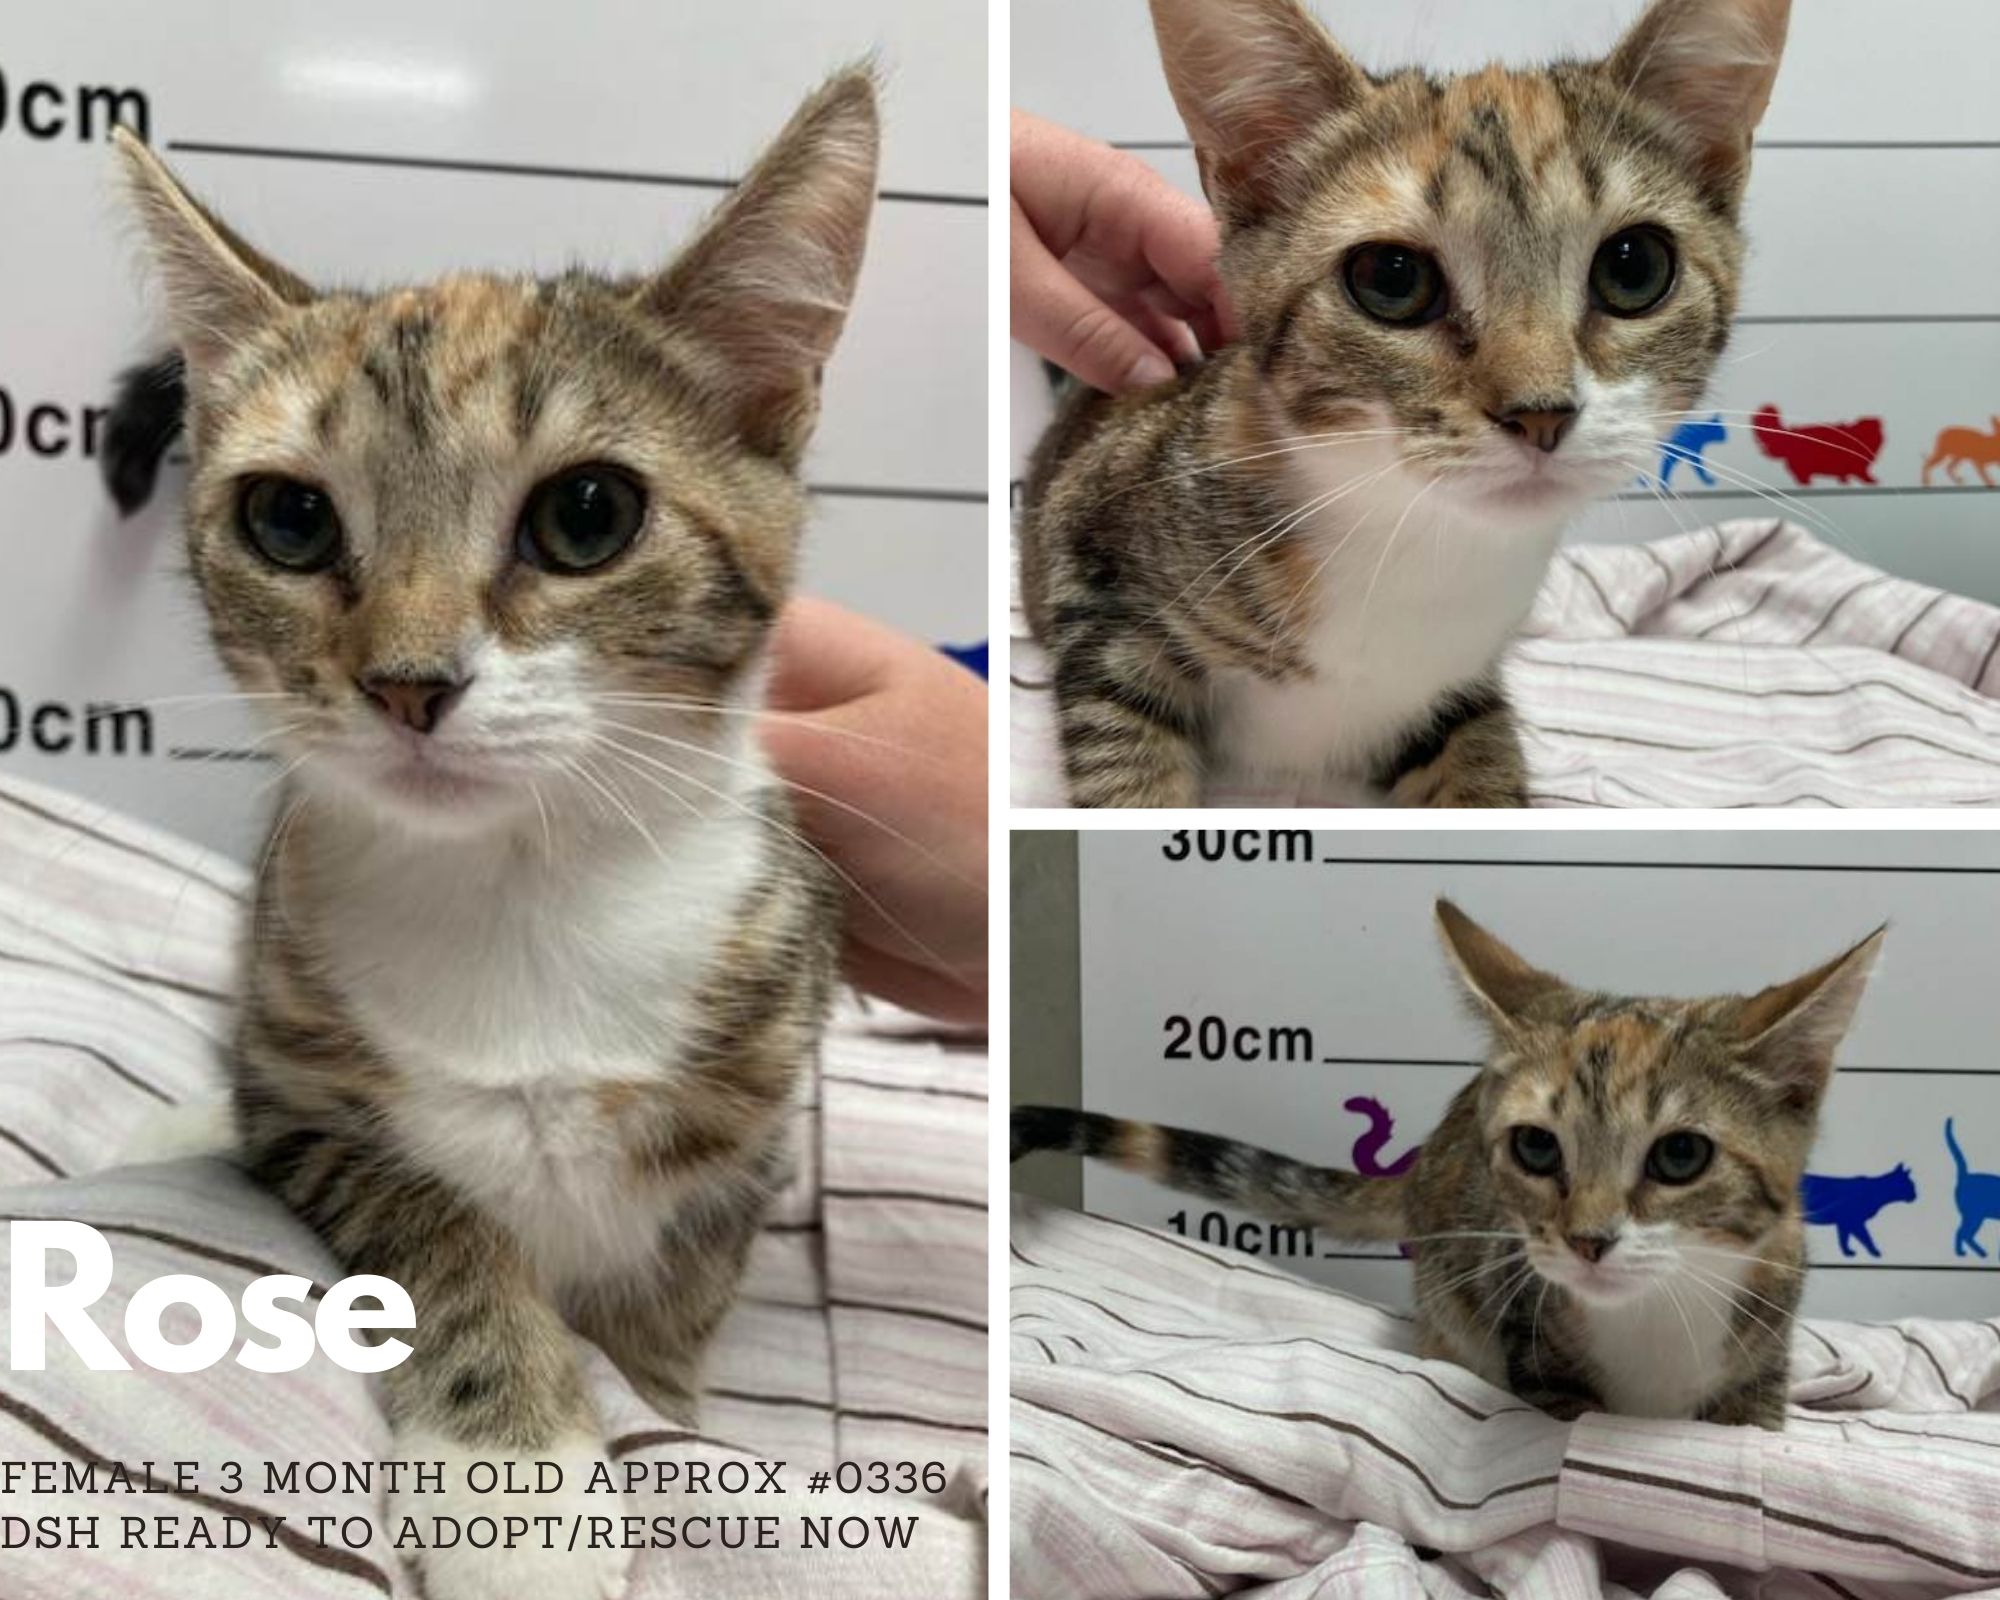 Name: Rose | Breed: Domestic Short hair | Age: 3 month old Approx